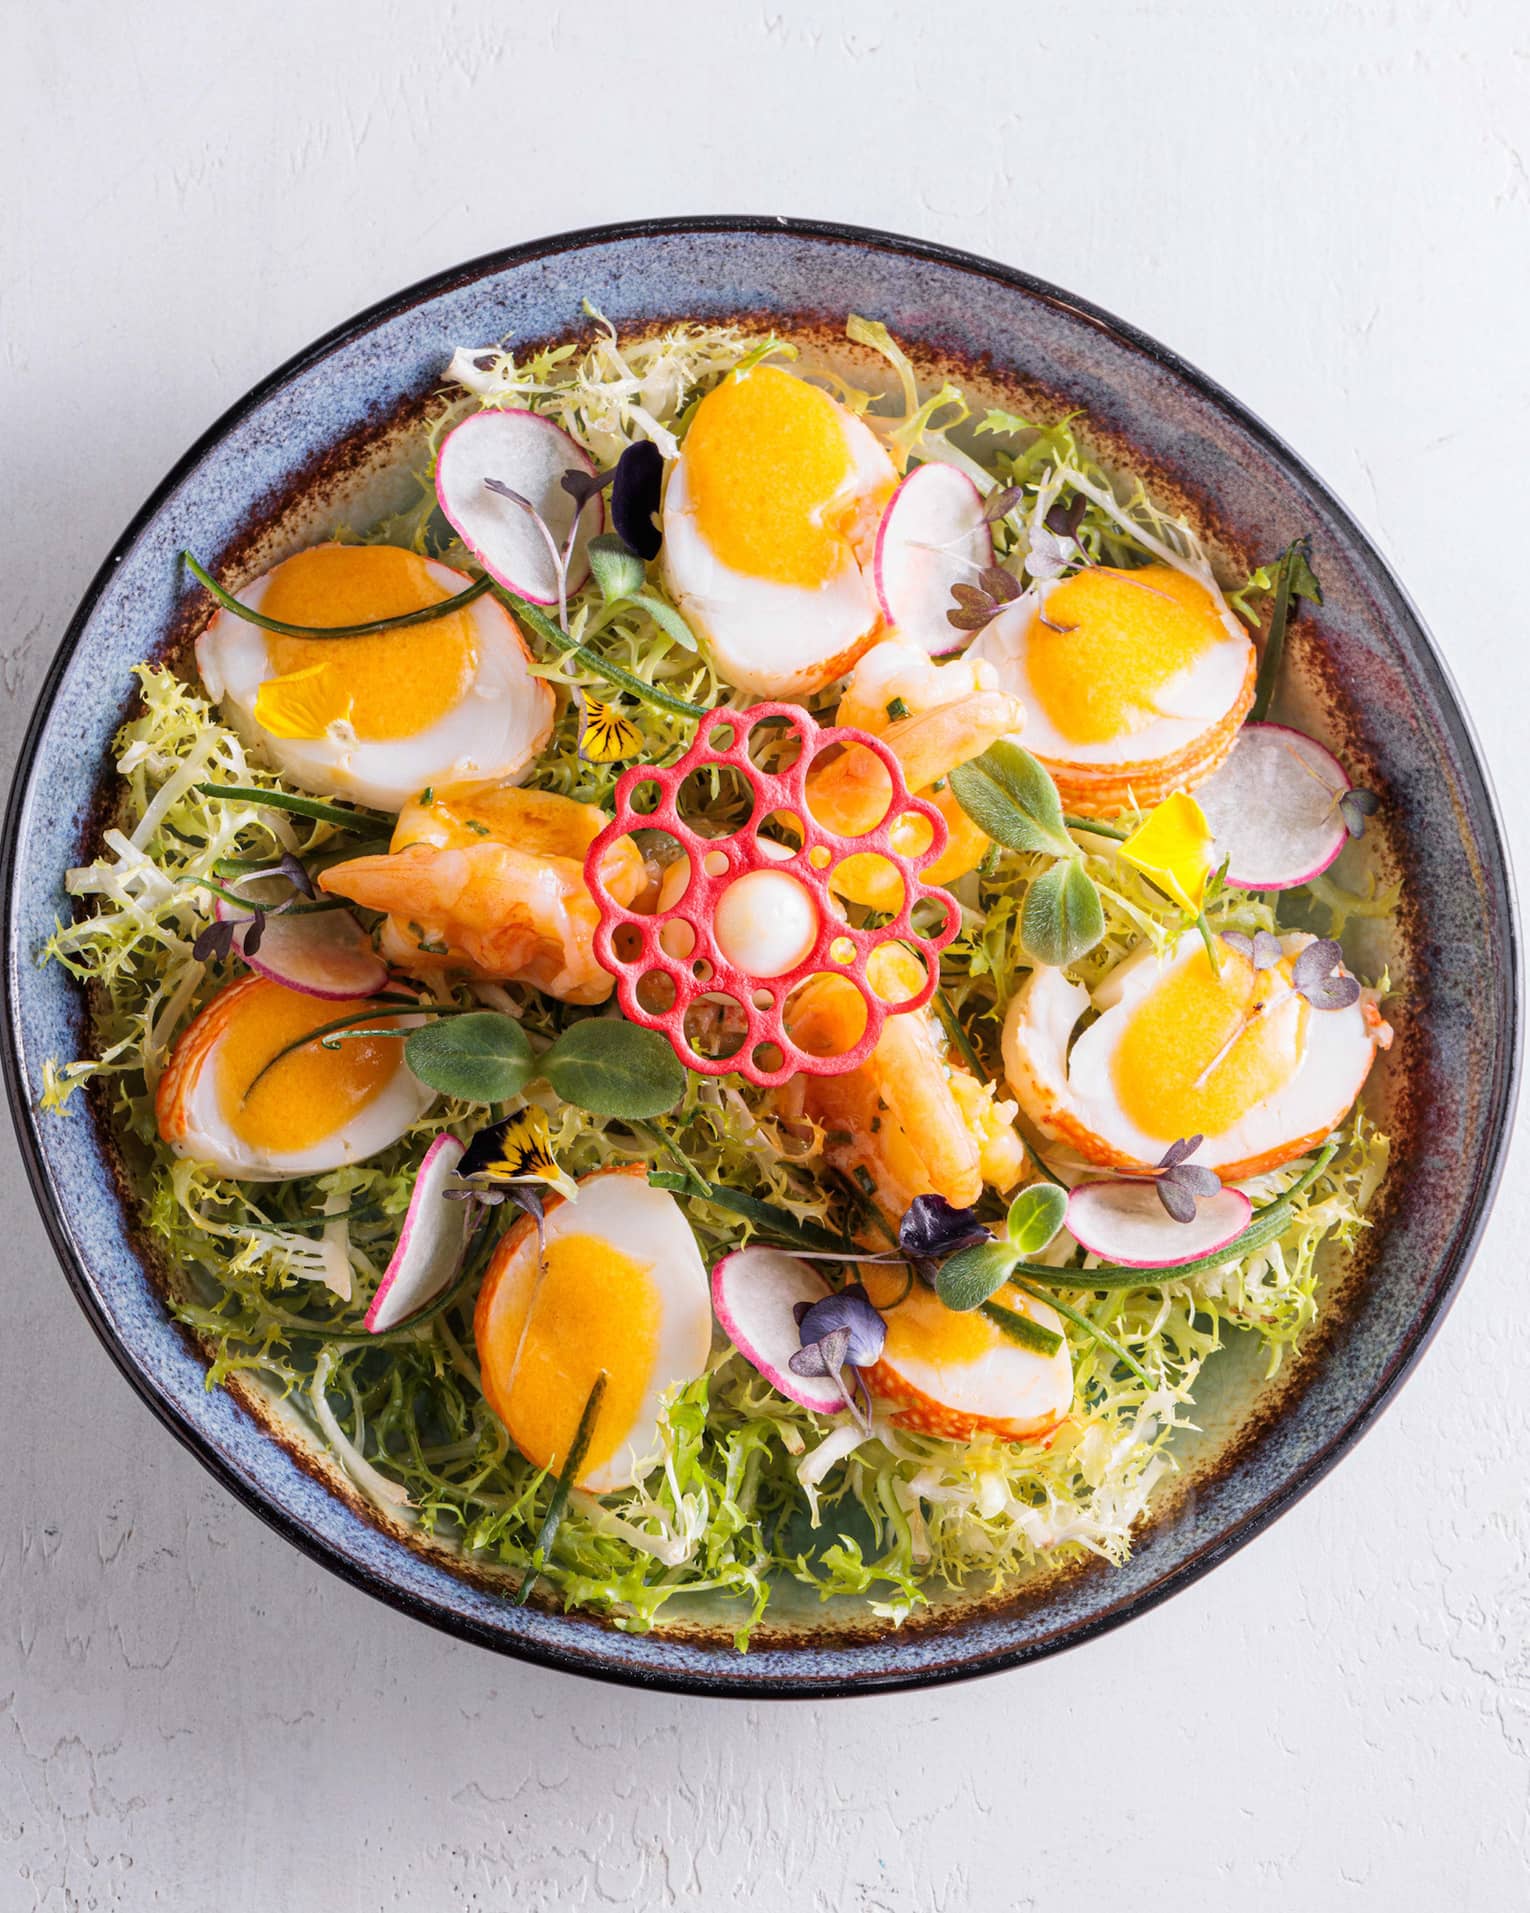 Bowl of greens, halved soft-boiled eggs, sliced radishes and a decorative garnish